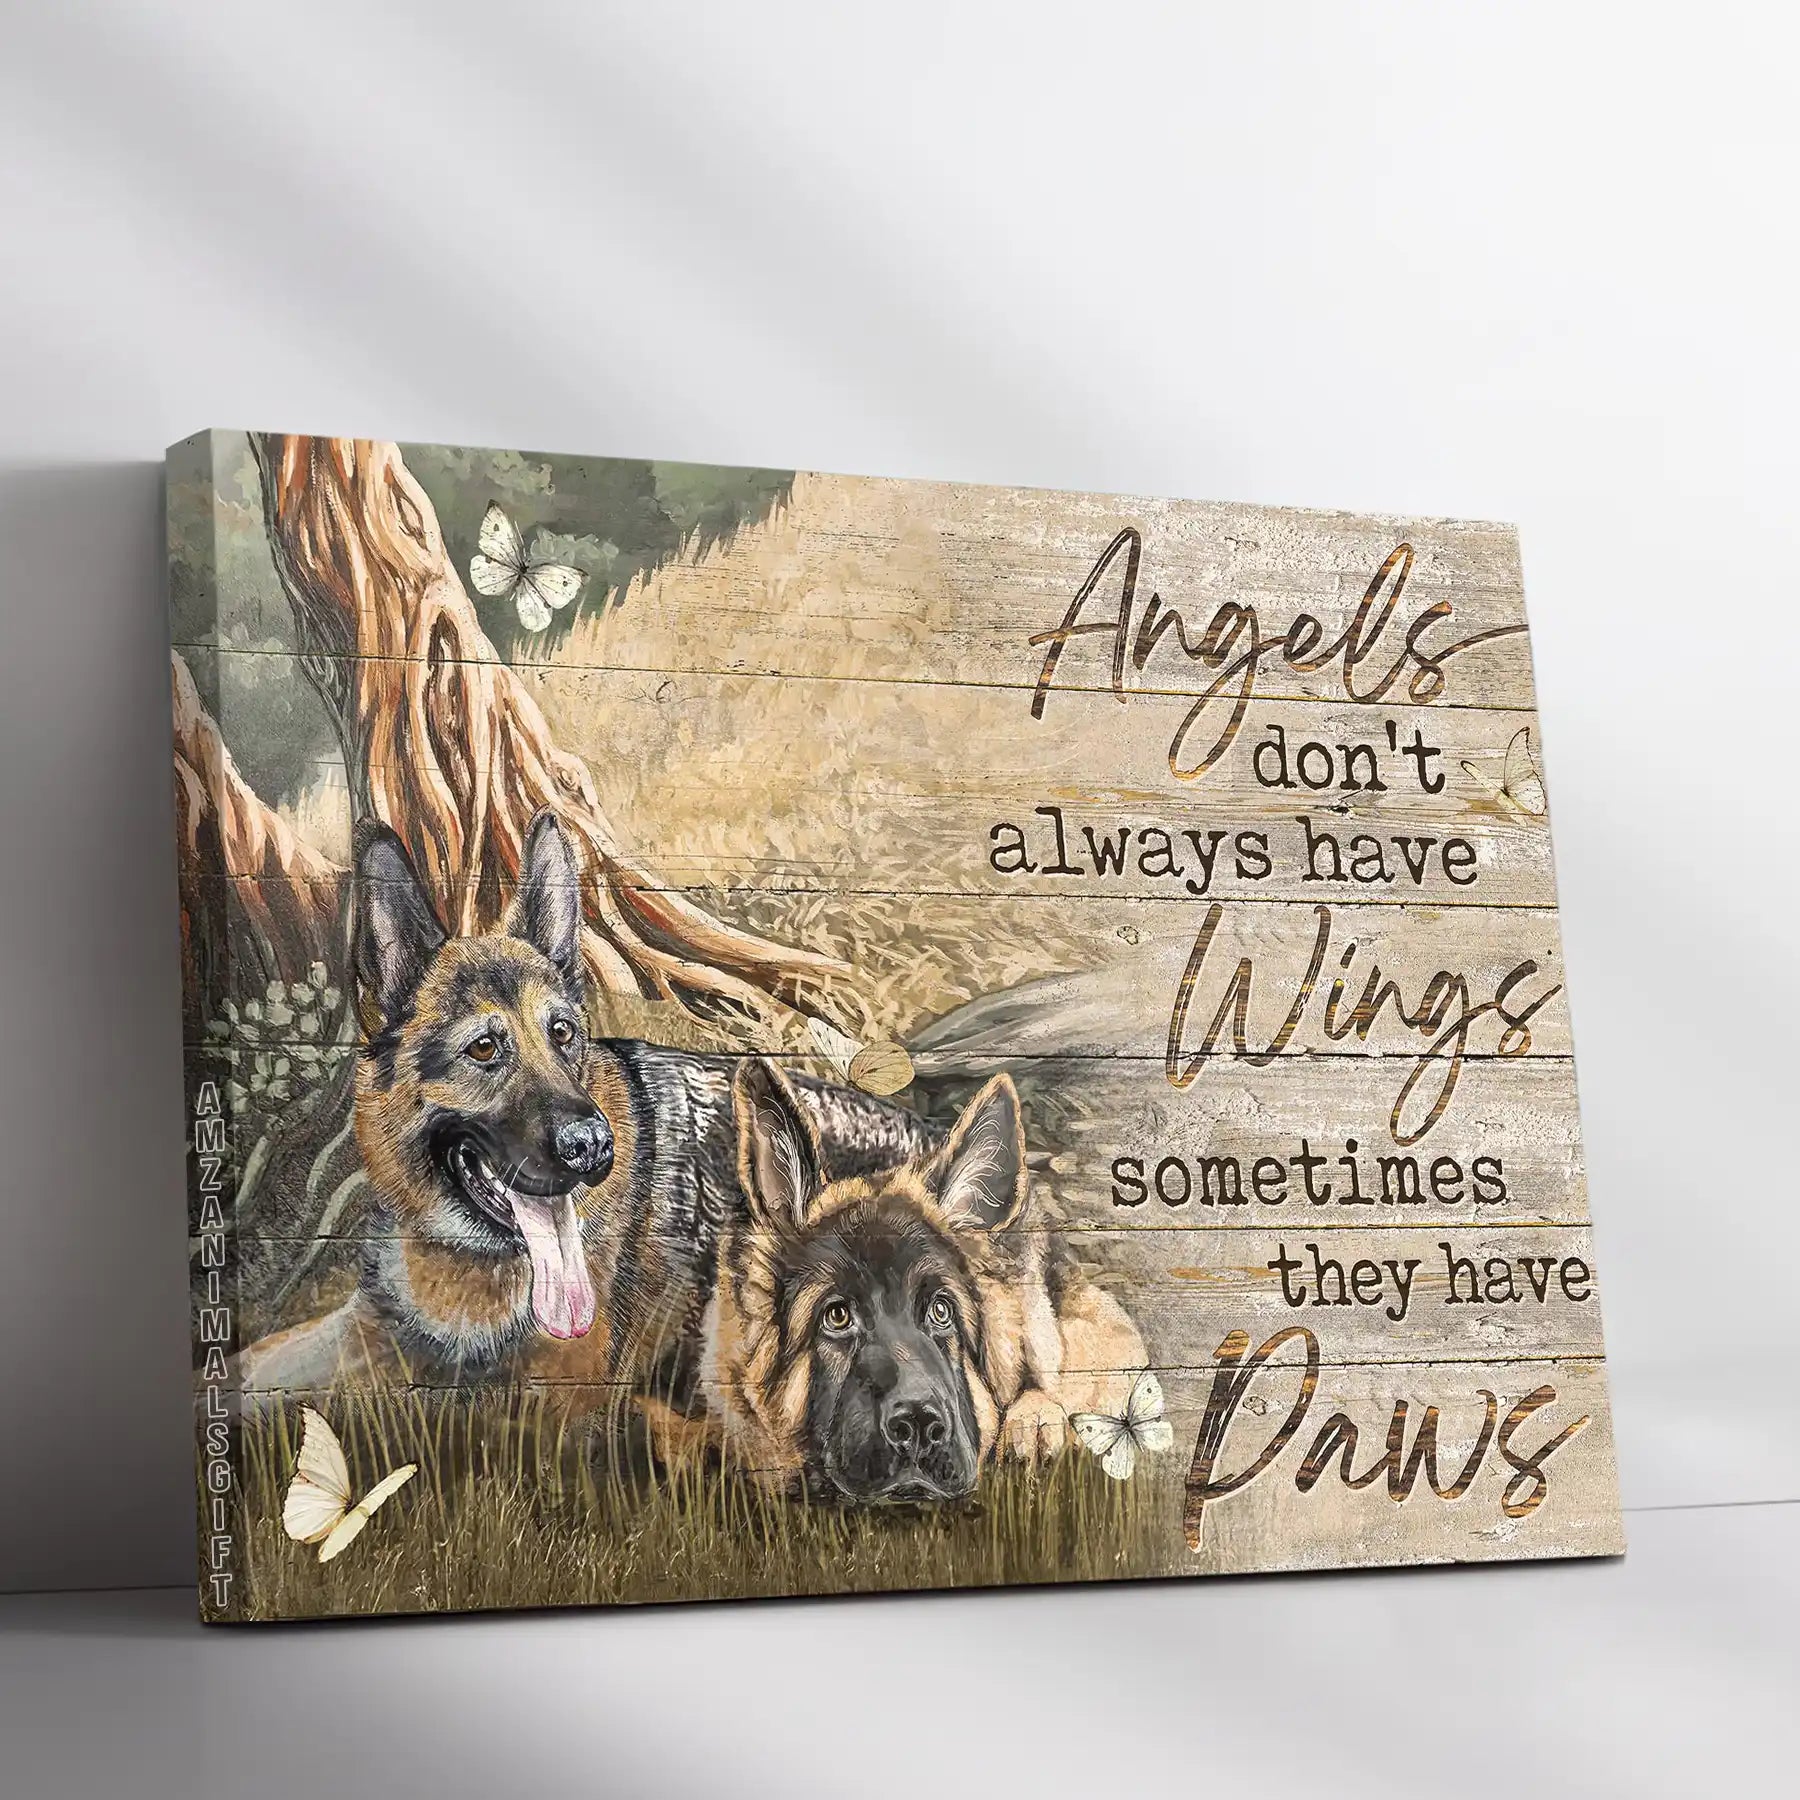 German Shepherd Premium Wrapped Landscape Canvas - German Shepherd, Under The Tree, Angels Don't Always Have Wings - Memorial Gifts For Dog Lovers - Amzanimalsgift